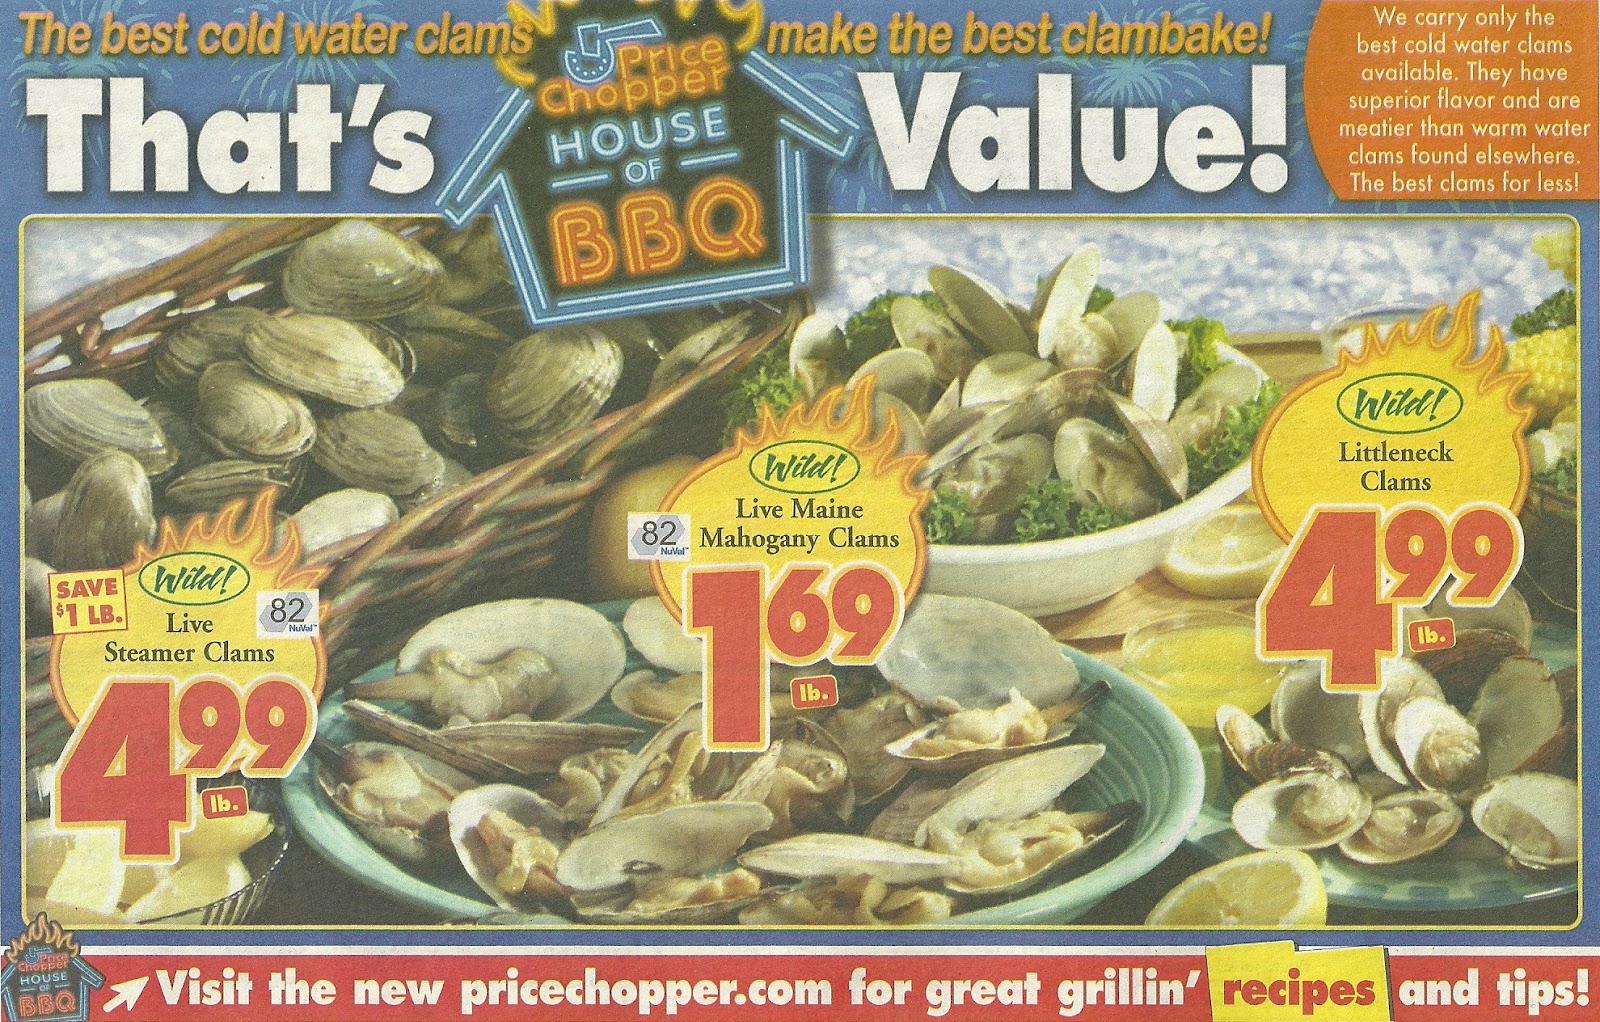 Oct 16, 2012. Below are the weekly ad coupon match ups for Price Chopper. You will find the.  Price Chopper has a Lowest Price Guarantee on items each week. You can be  sure ... $5.99 Shipped! Next post: Free Sample of Cafe Buestlo.